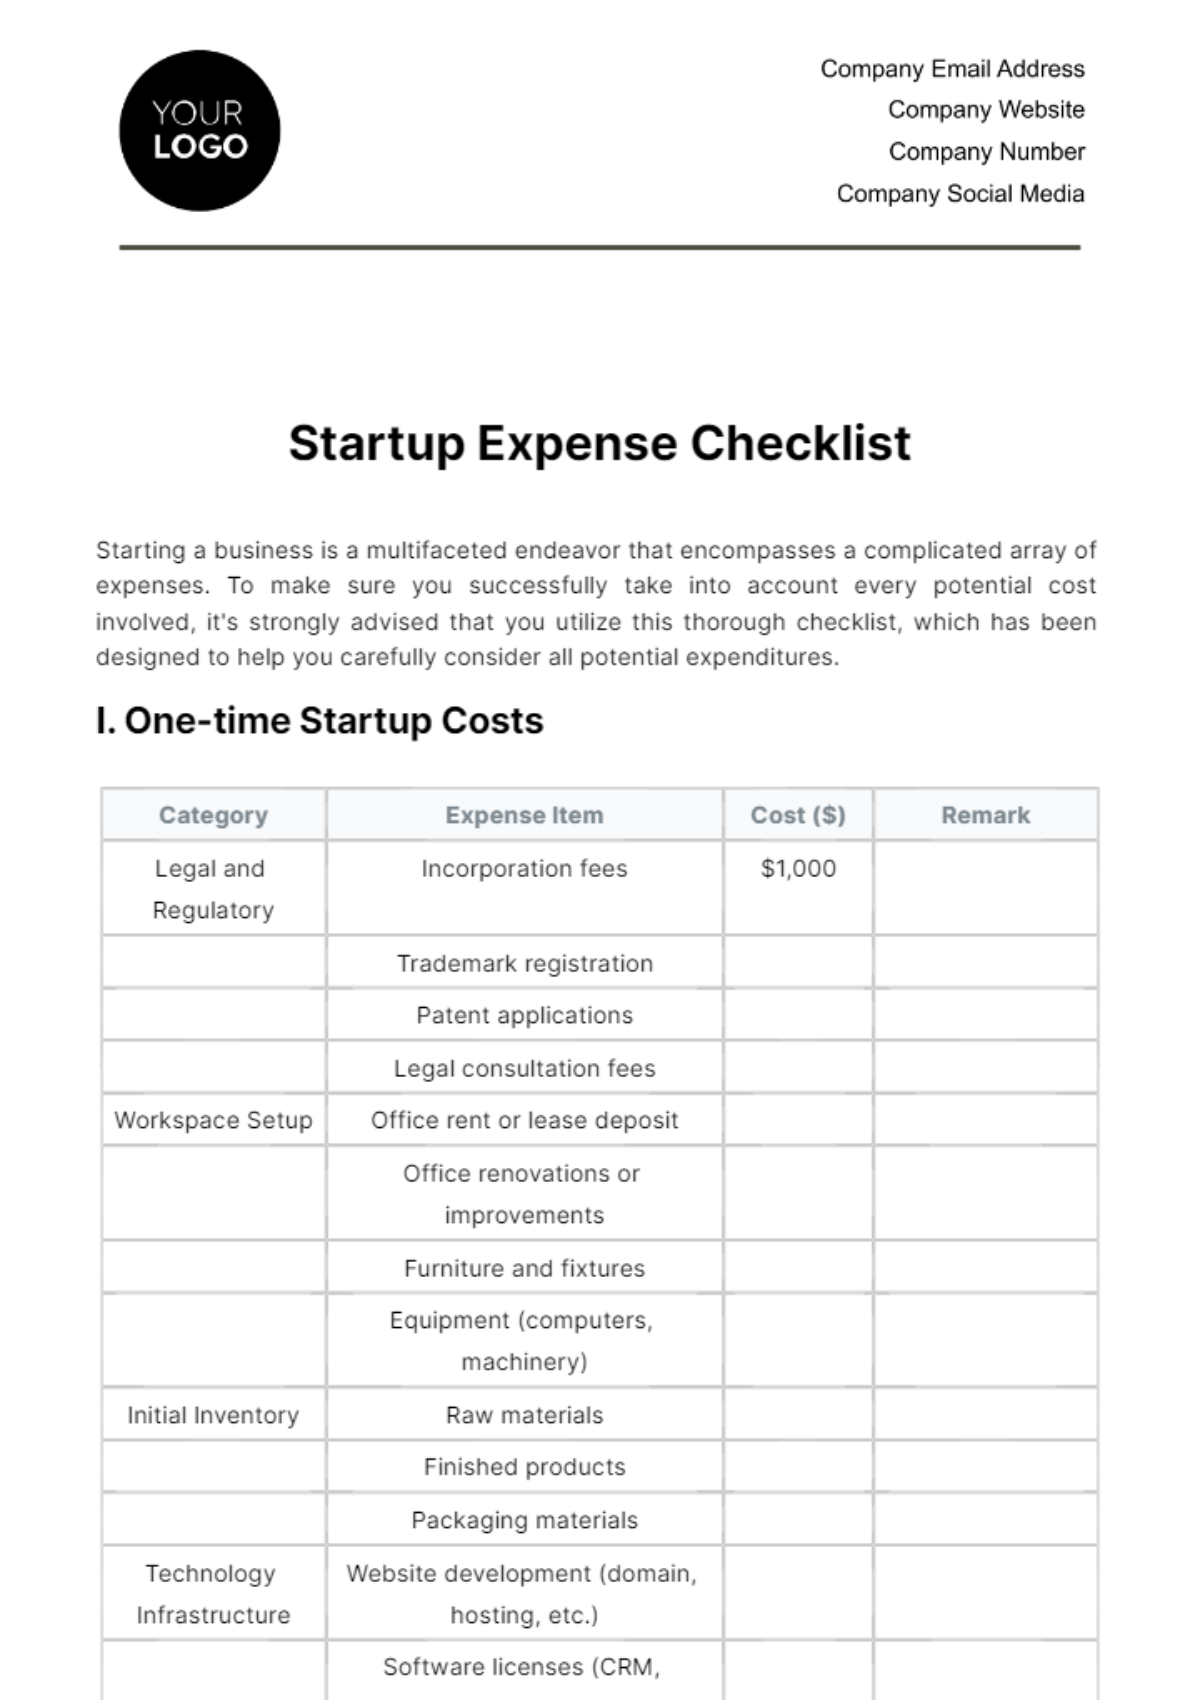 Free Startup Expense Checklist Template